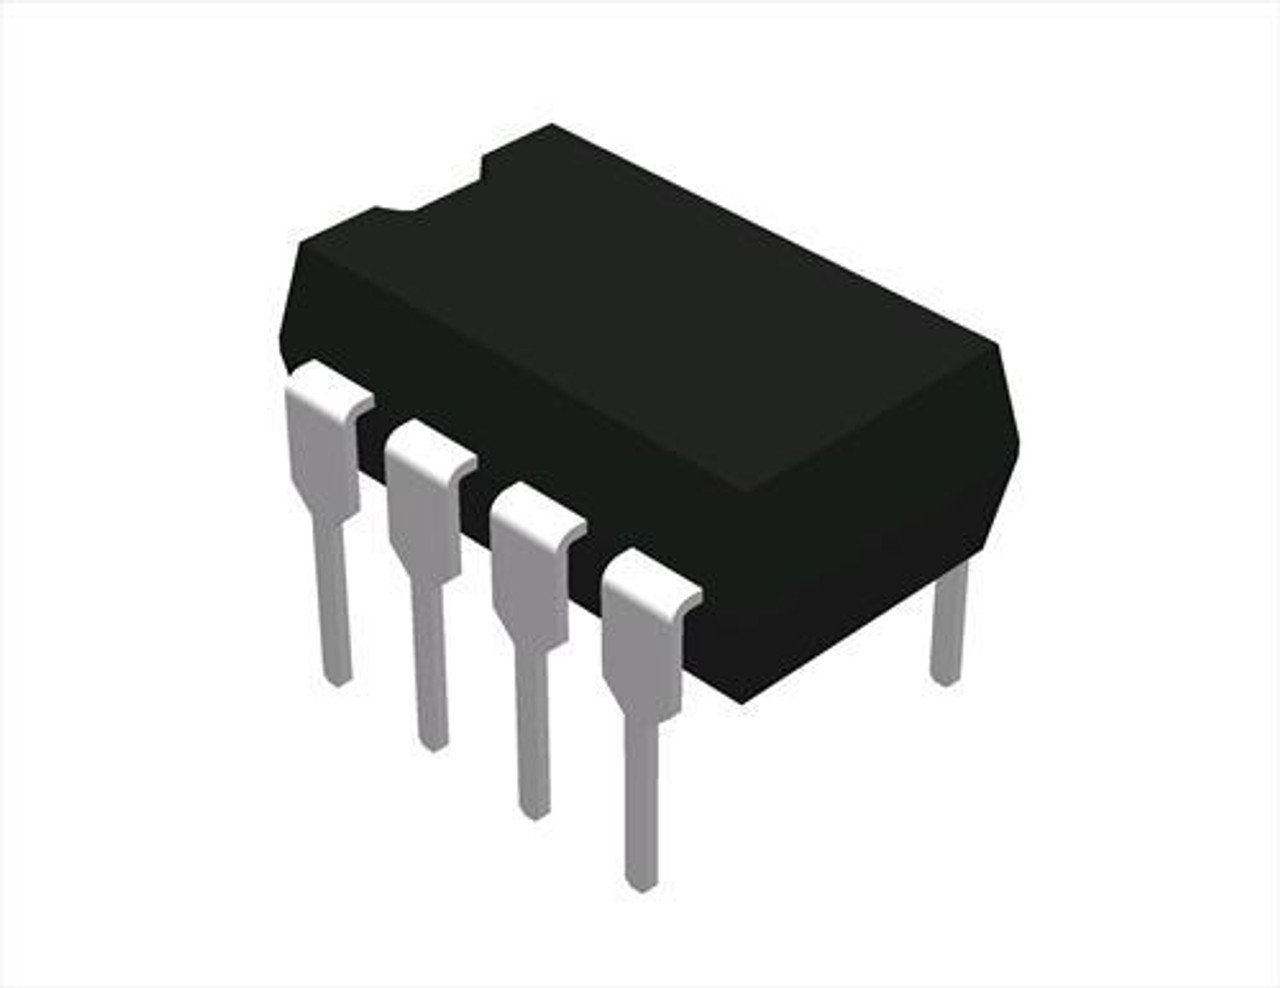 10 pcs HCPL-4503 PDIP-8 Optocoupler DC-IN 1-CH Transistor With Base DC-OUT 